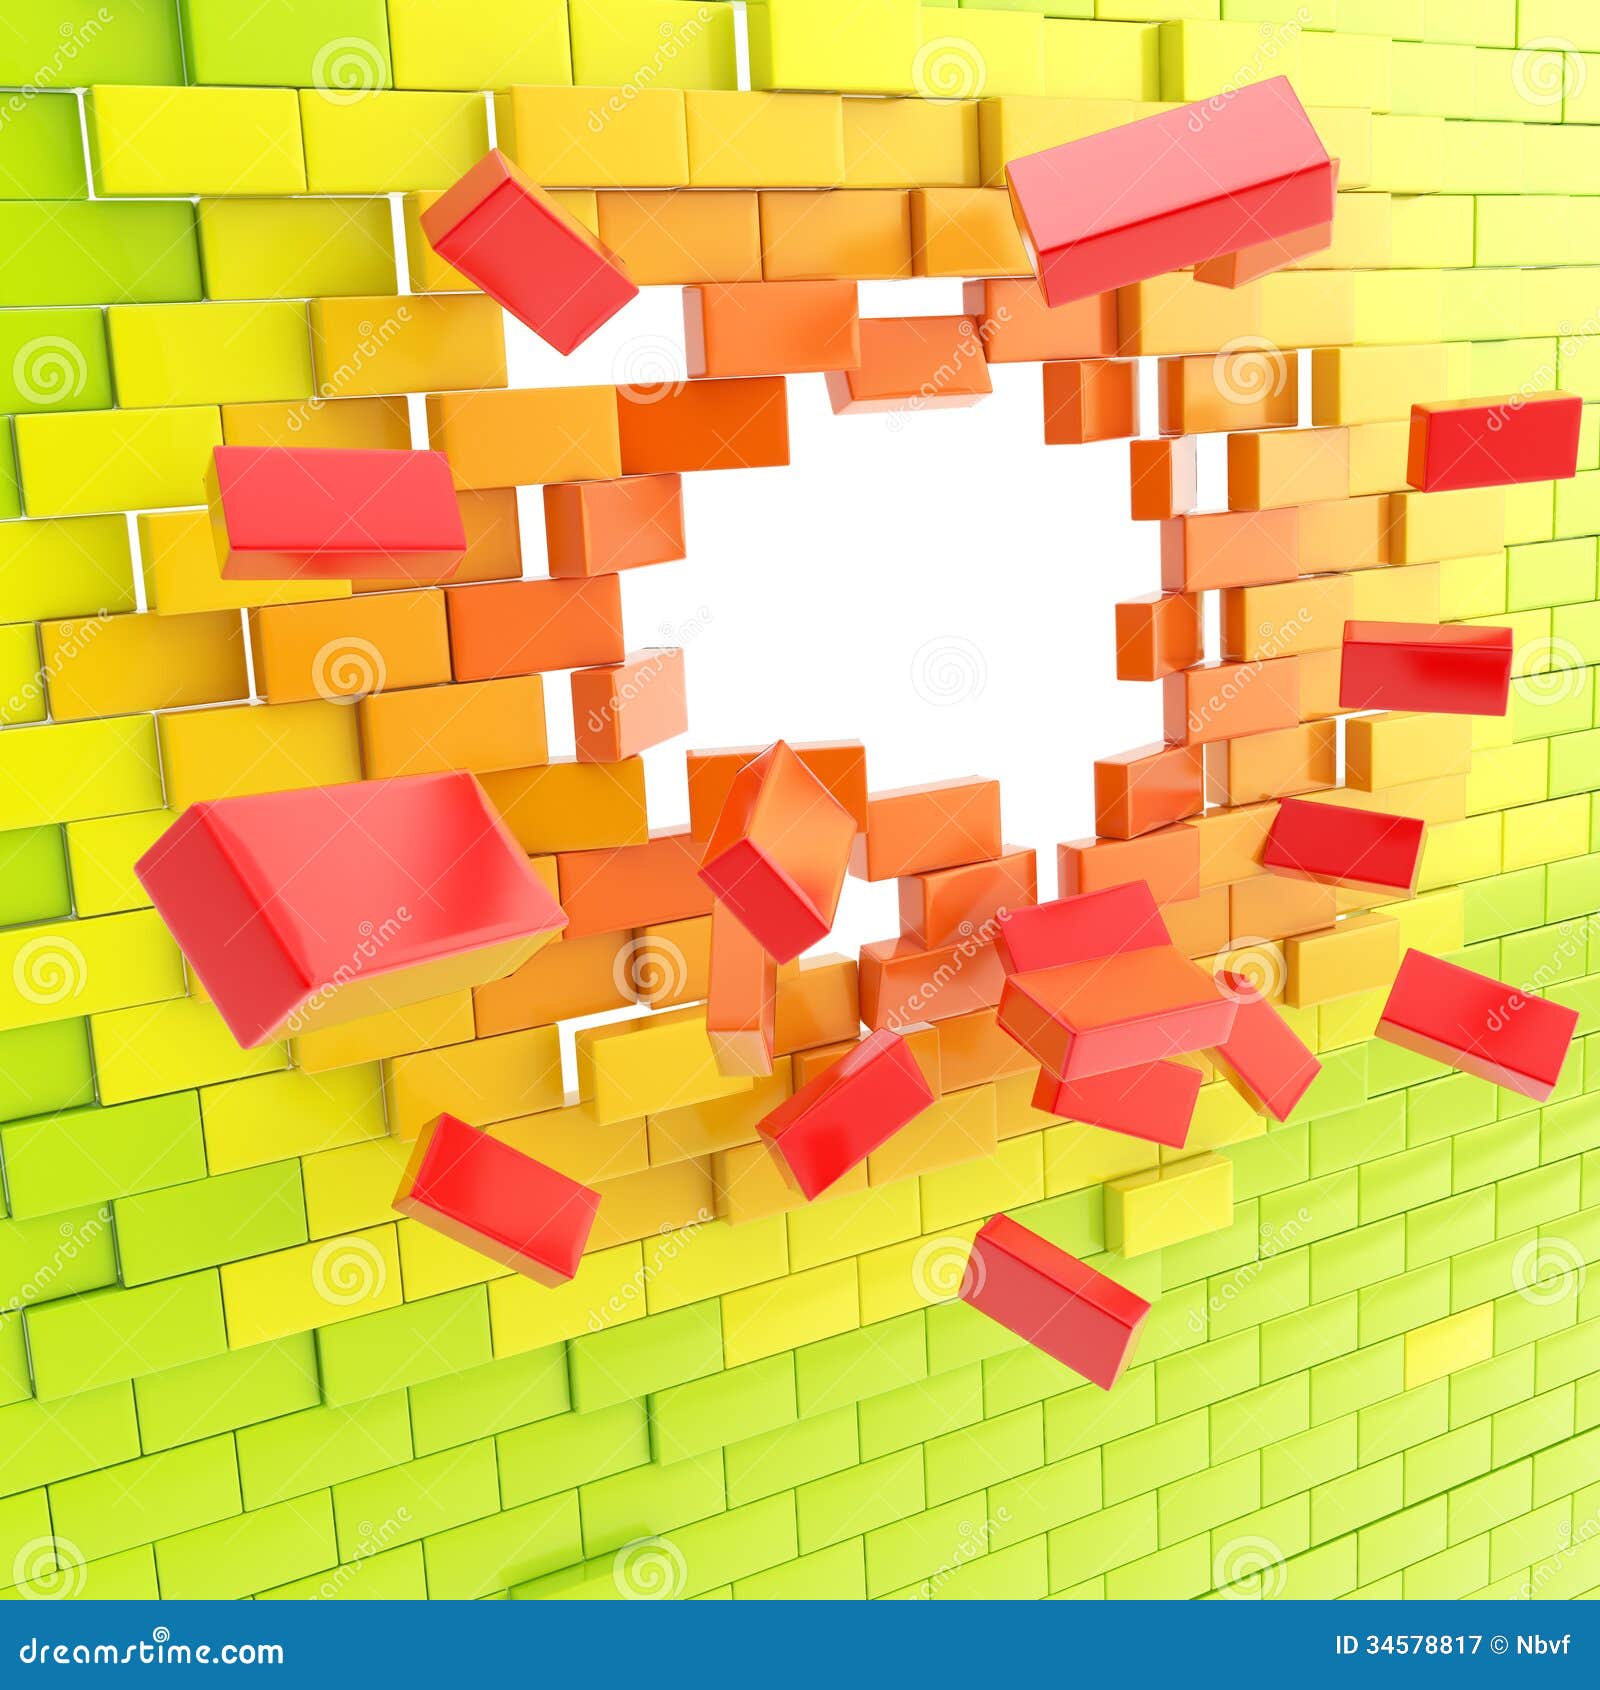 Brick Wall Broken Into Pieces Background Royalty Free Stock Photography ...